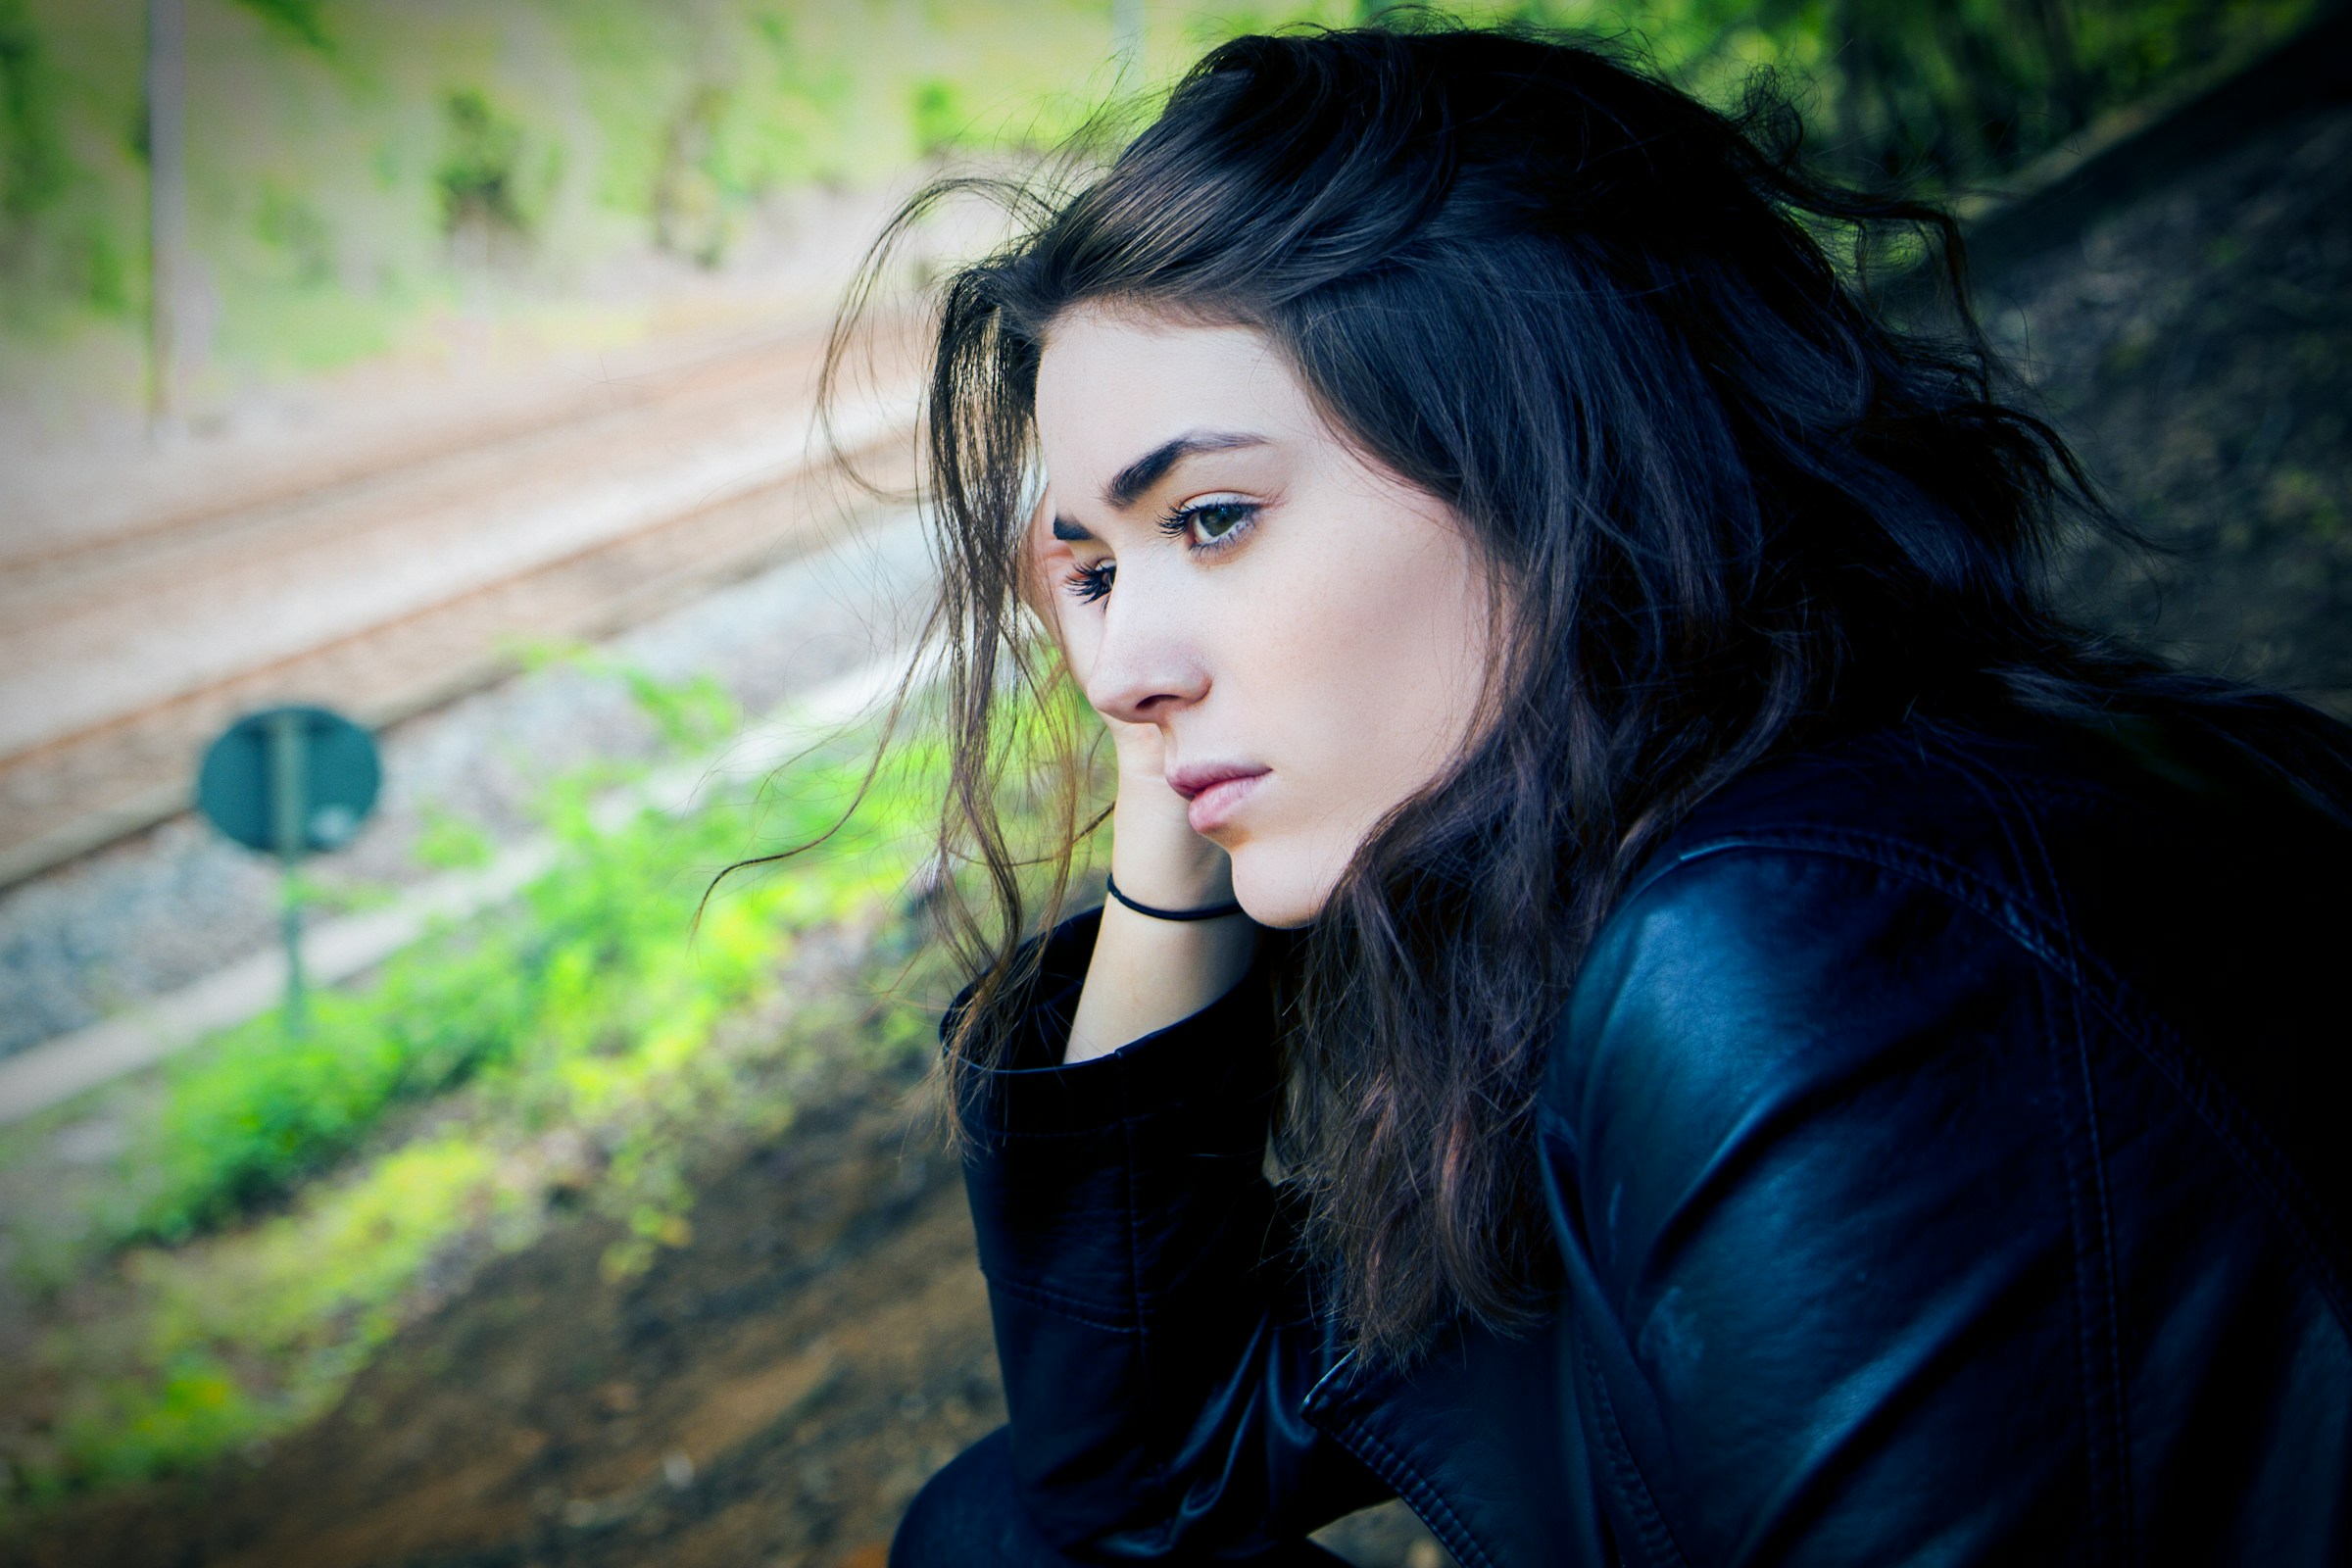 A thoughtful young woman sitting outdoors during daytime | Source: Unsplash